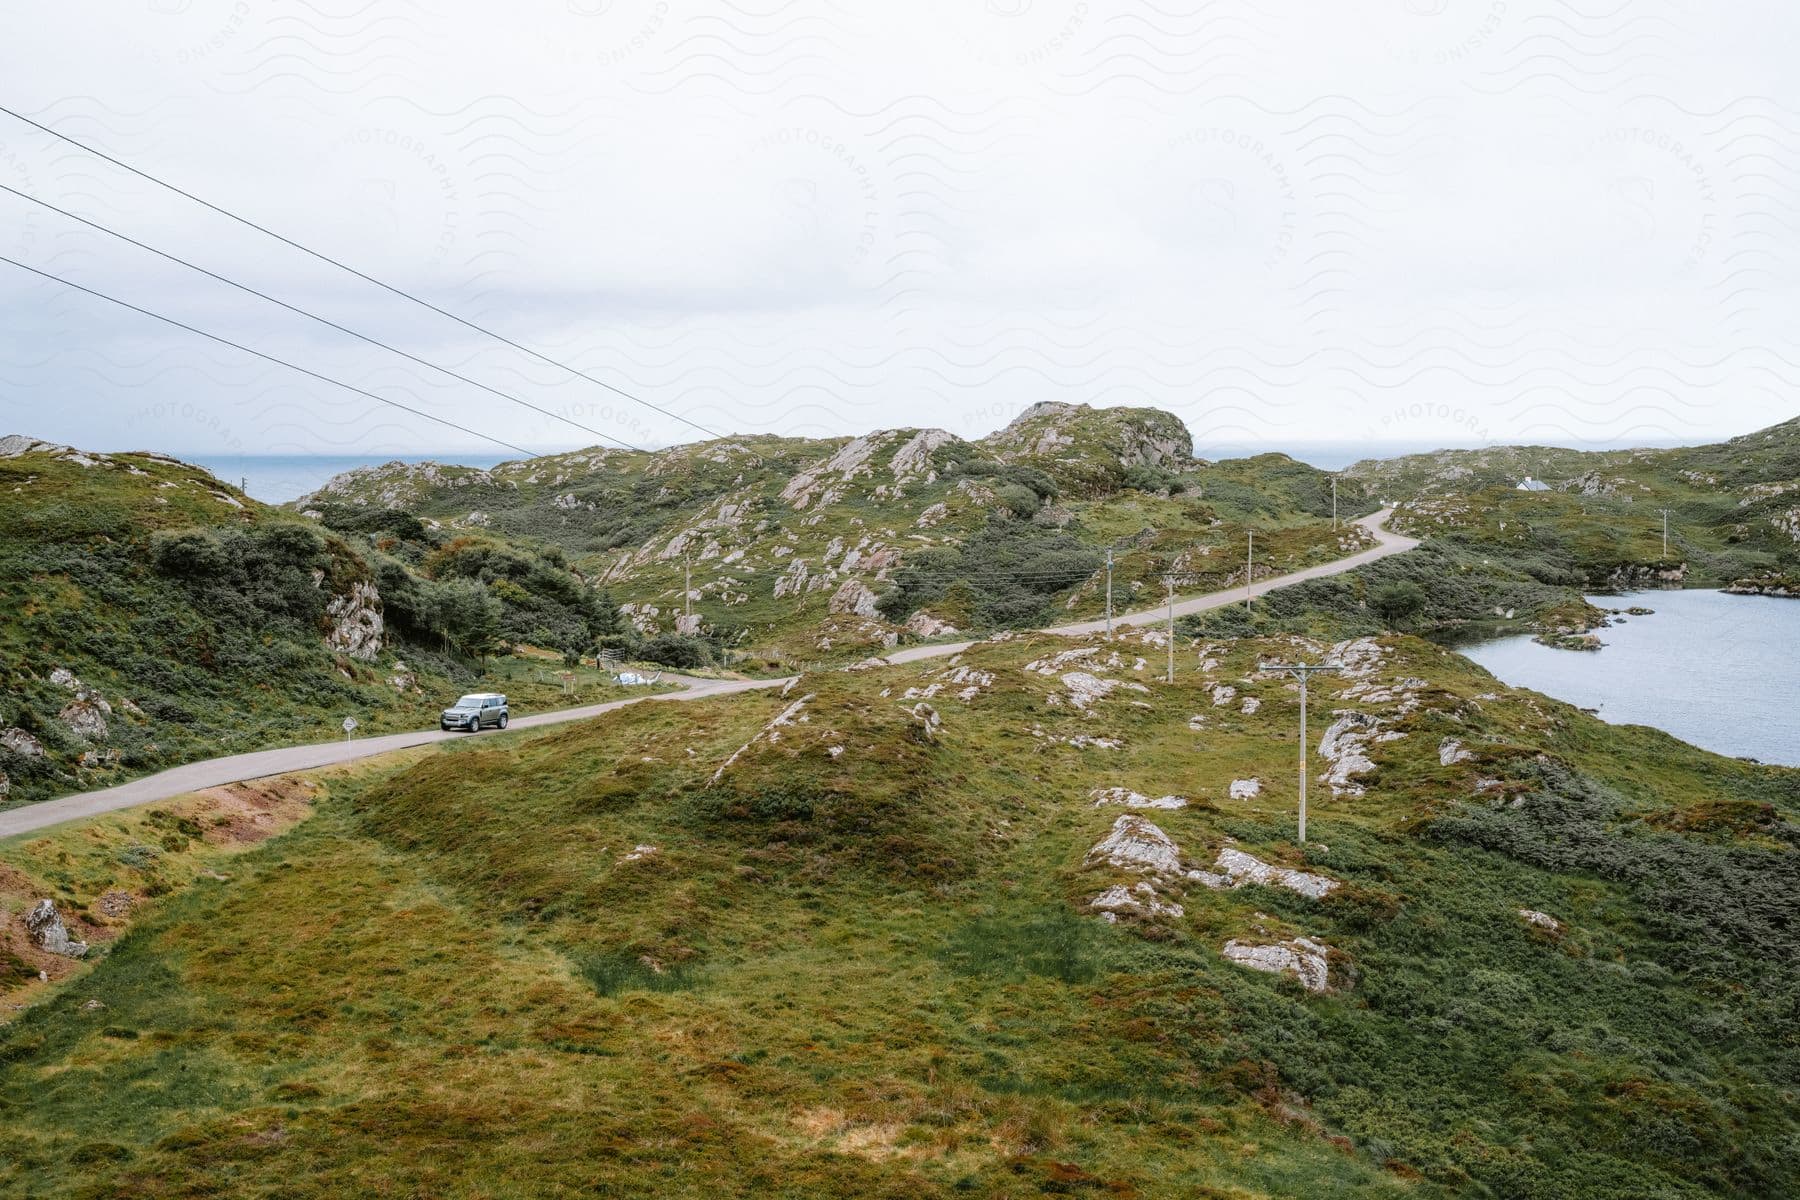 An automobile travels on a road through the mountains along the coast